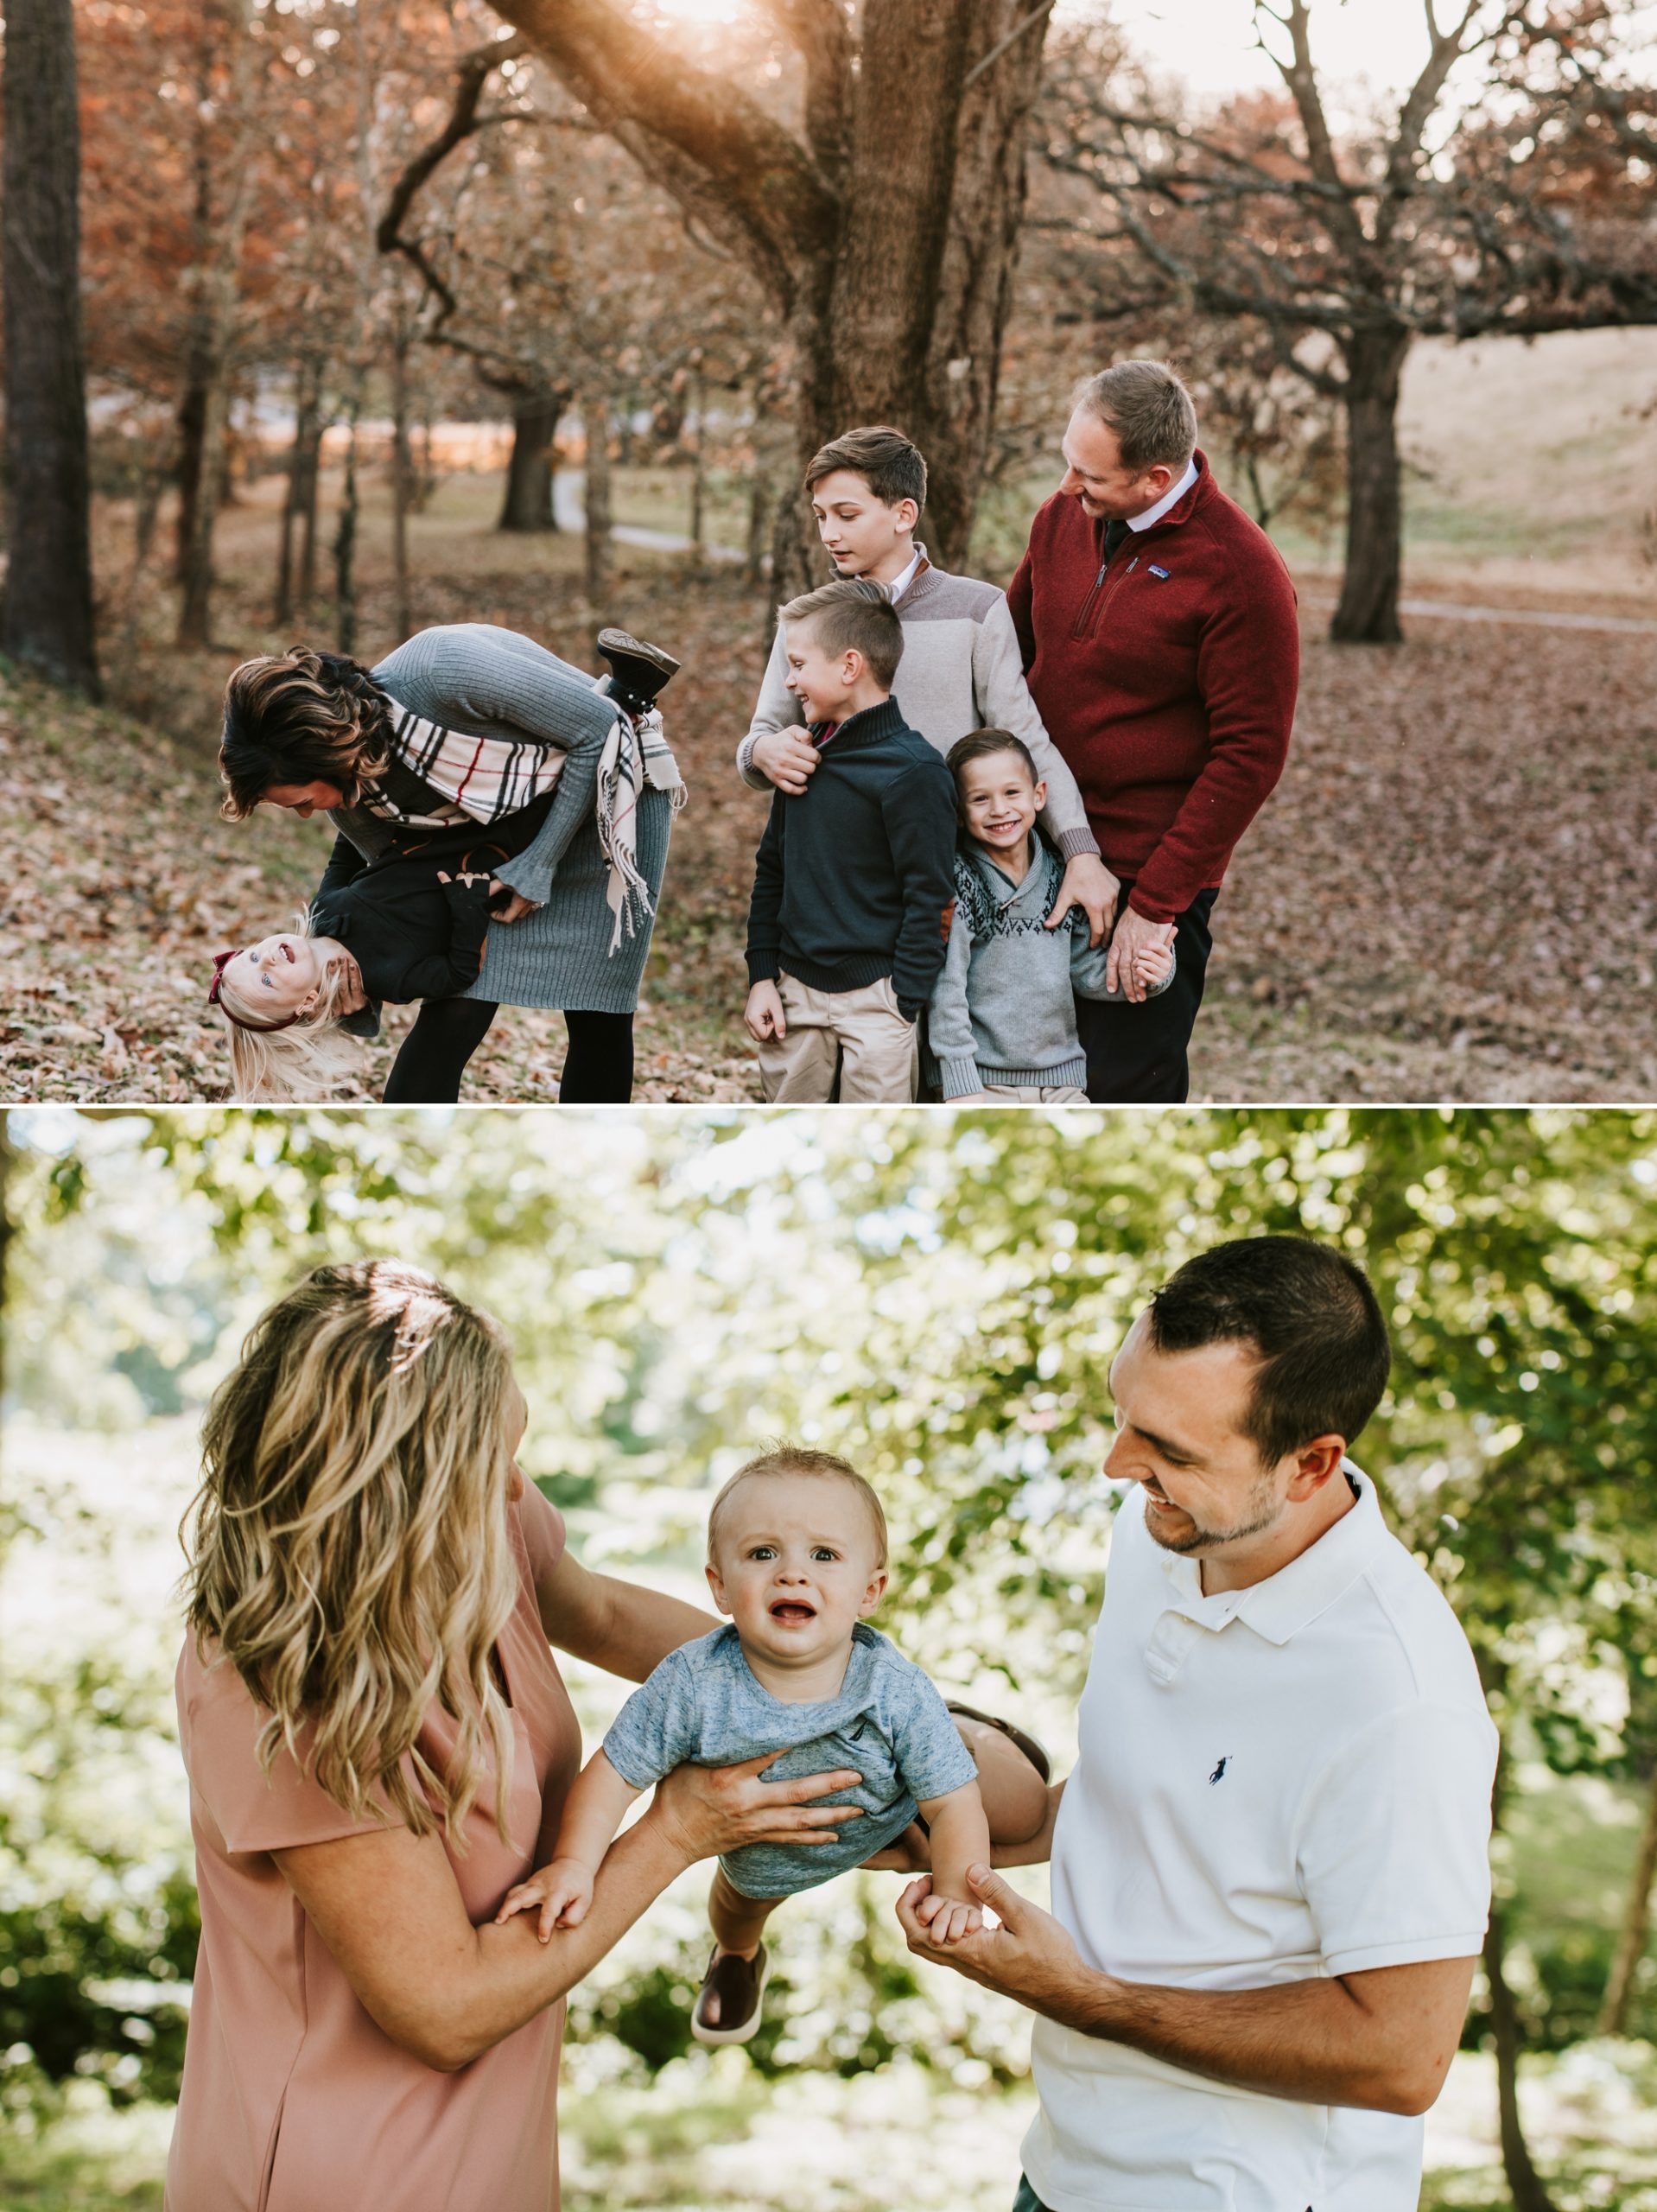 Parents acting silly with their kids. Family Photographer 63090